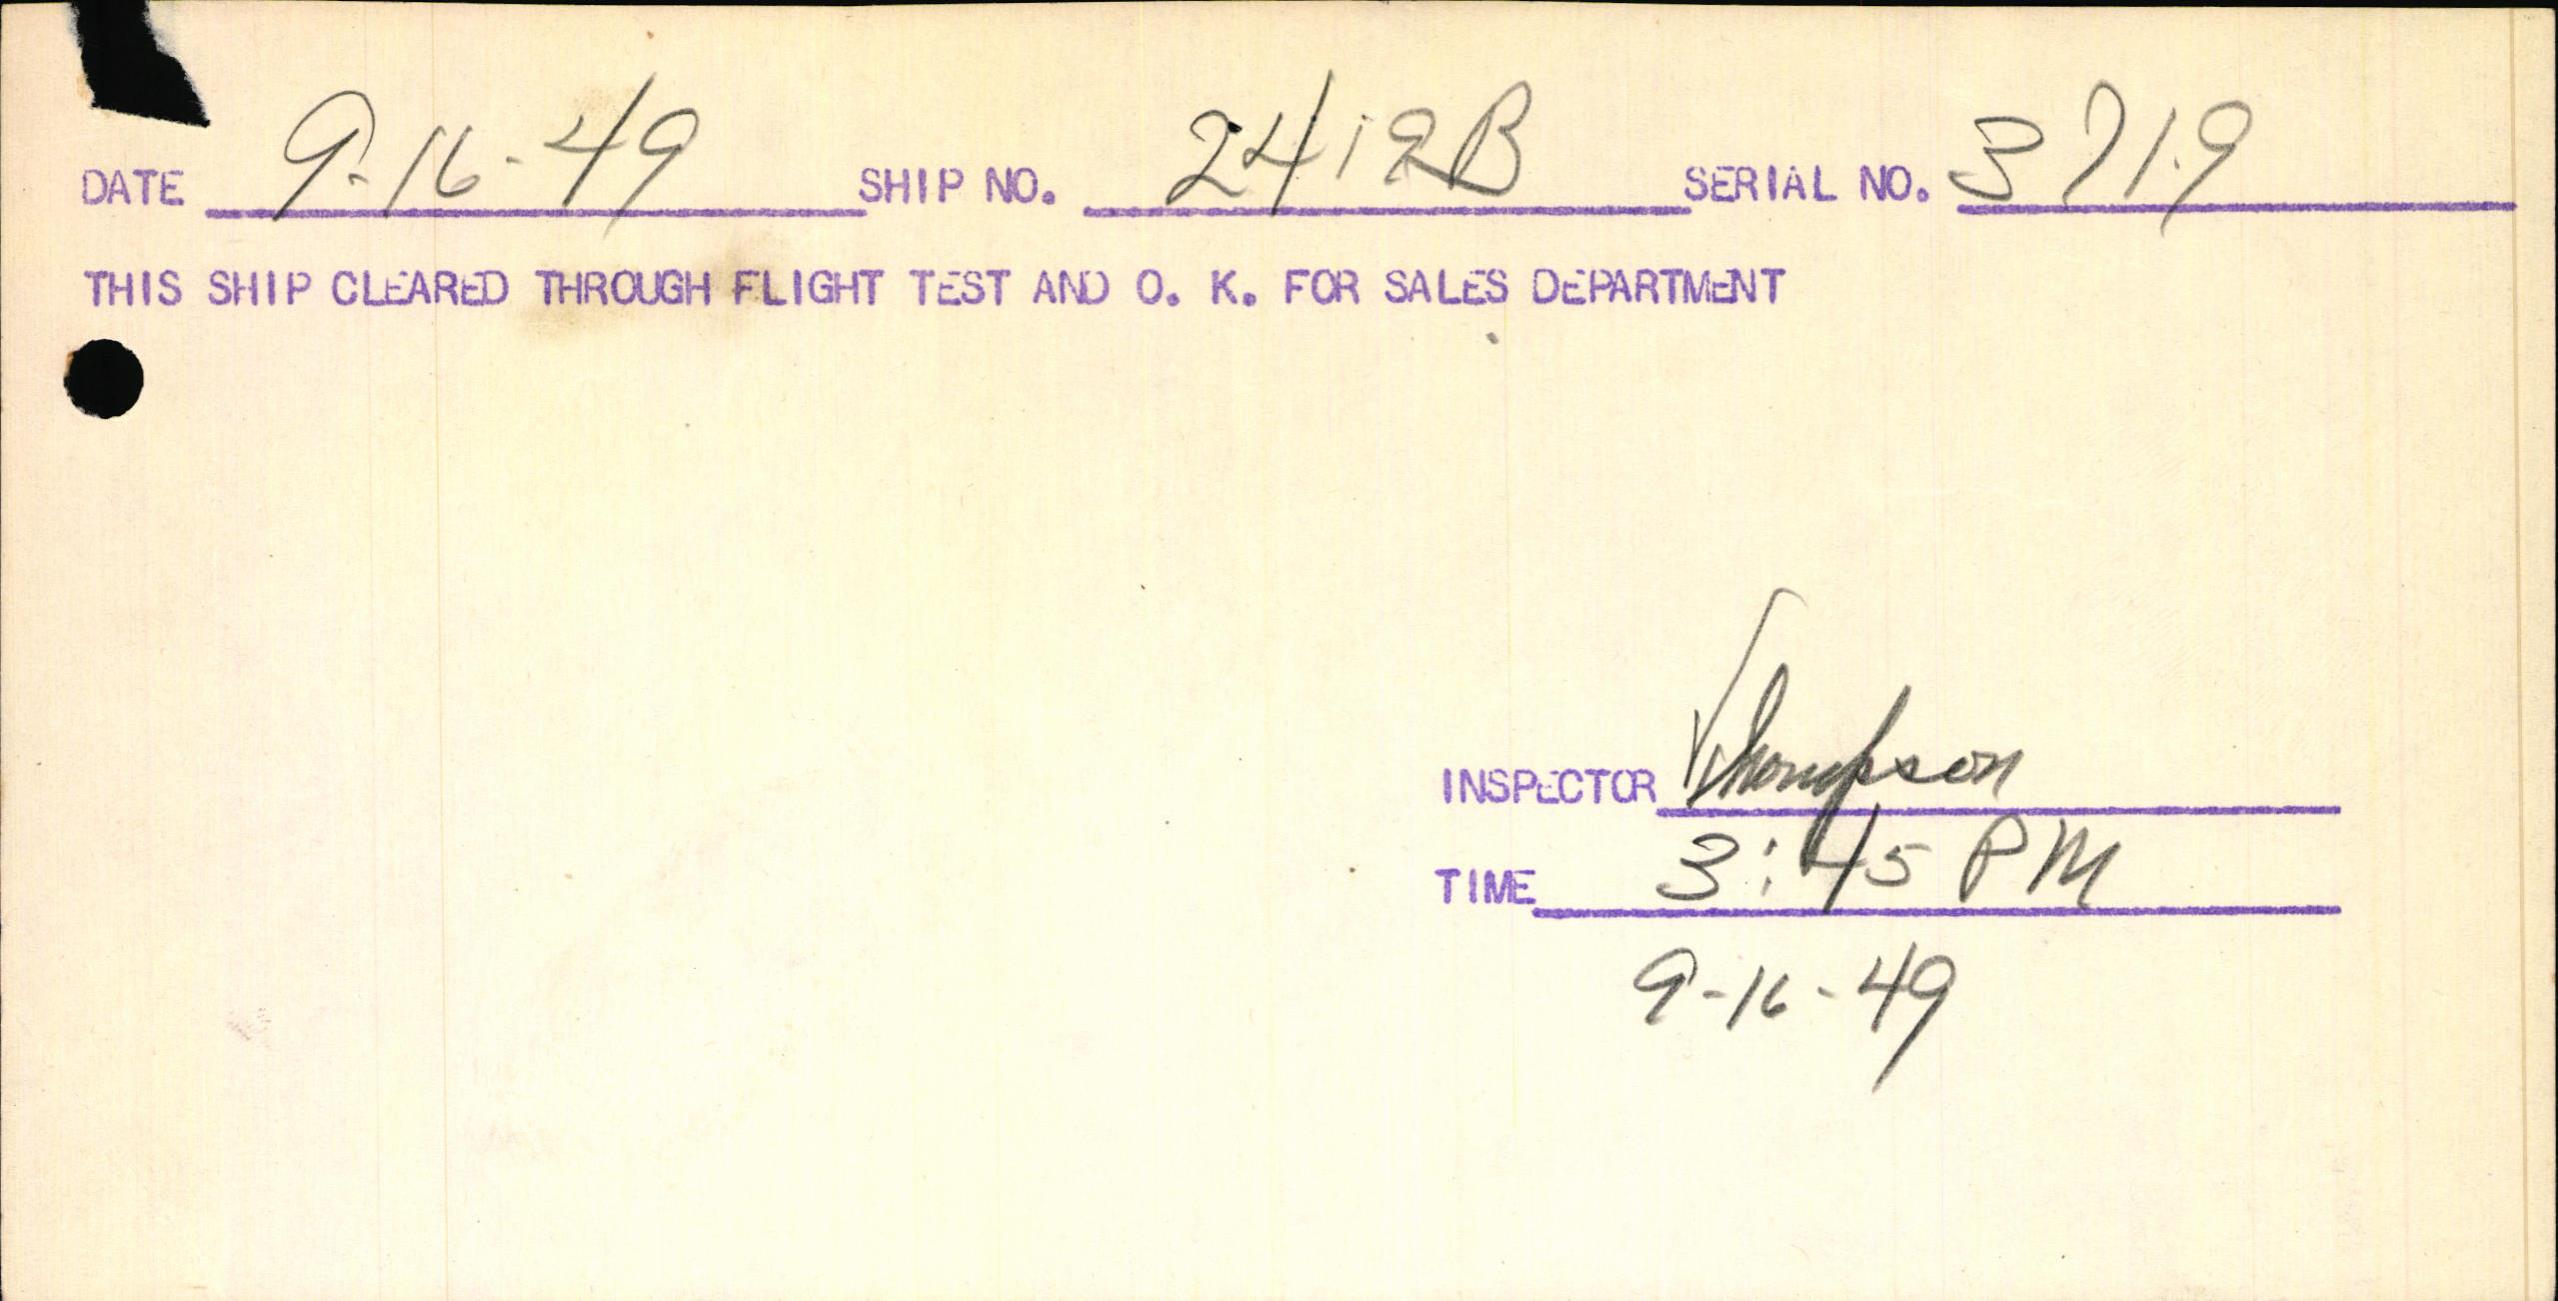 Sample page 1 from AirCorps Library document: Technical Information for Serial Number 3719